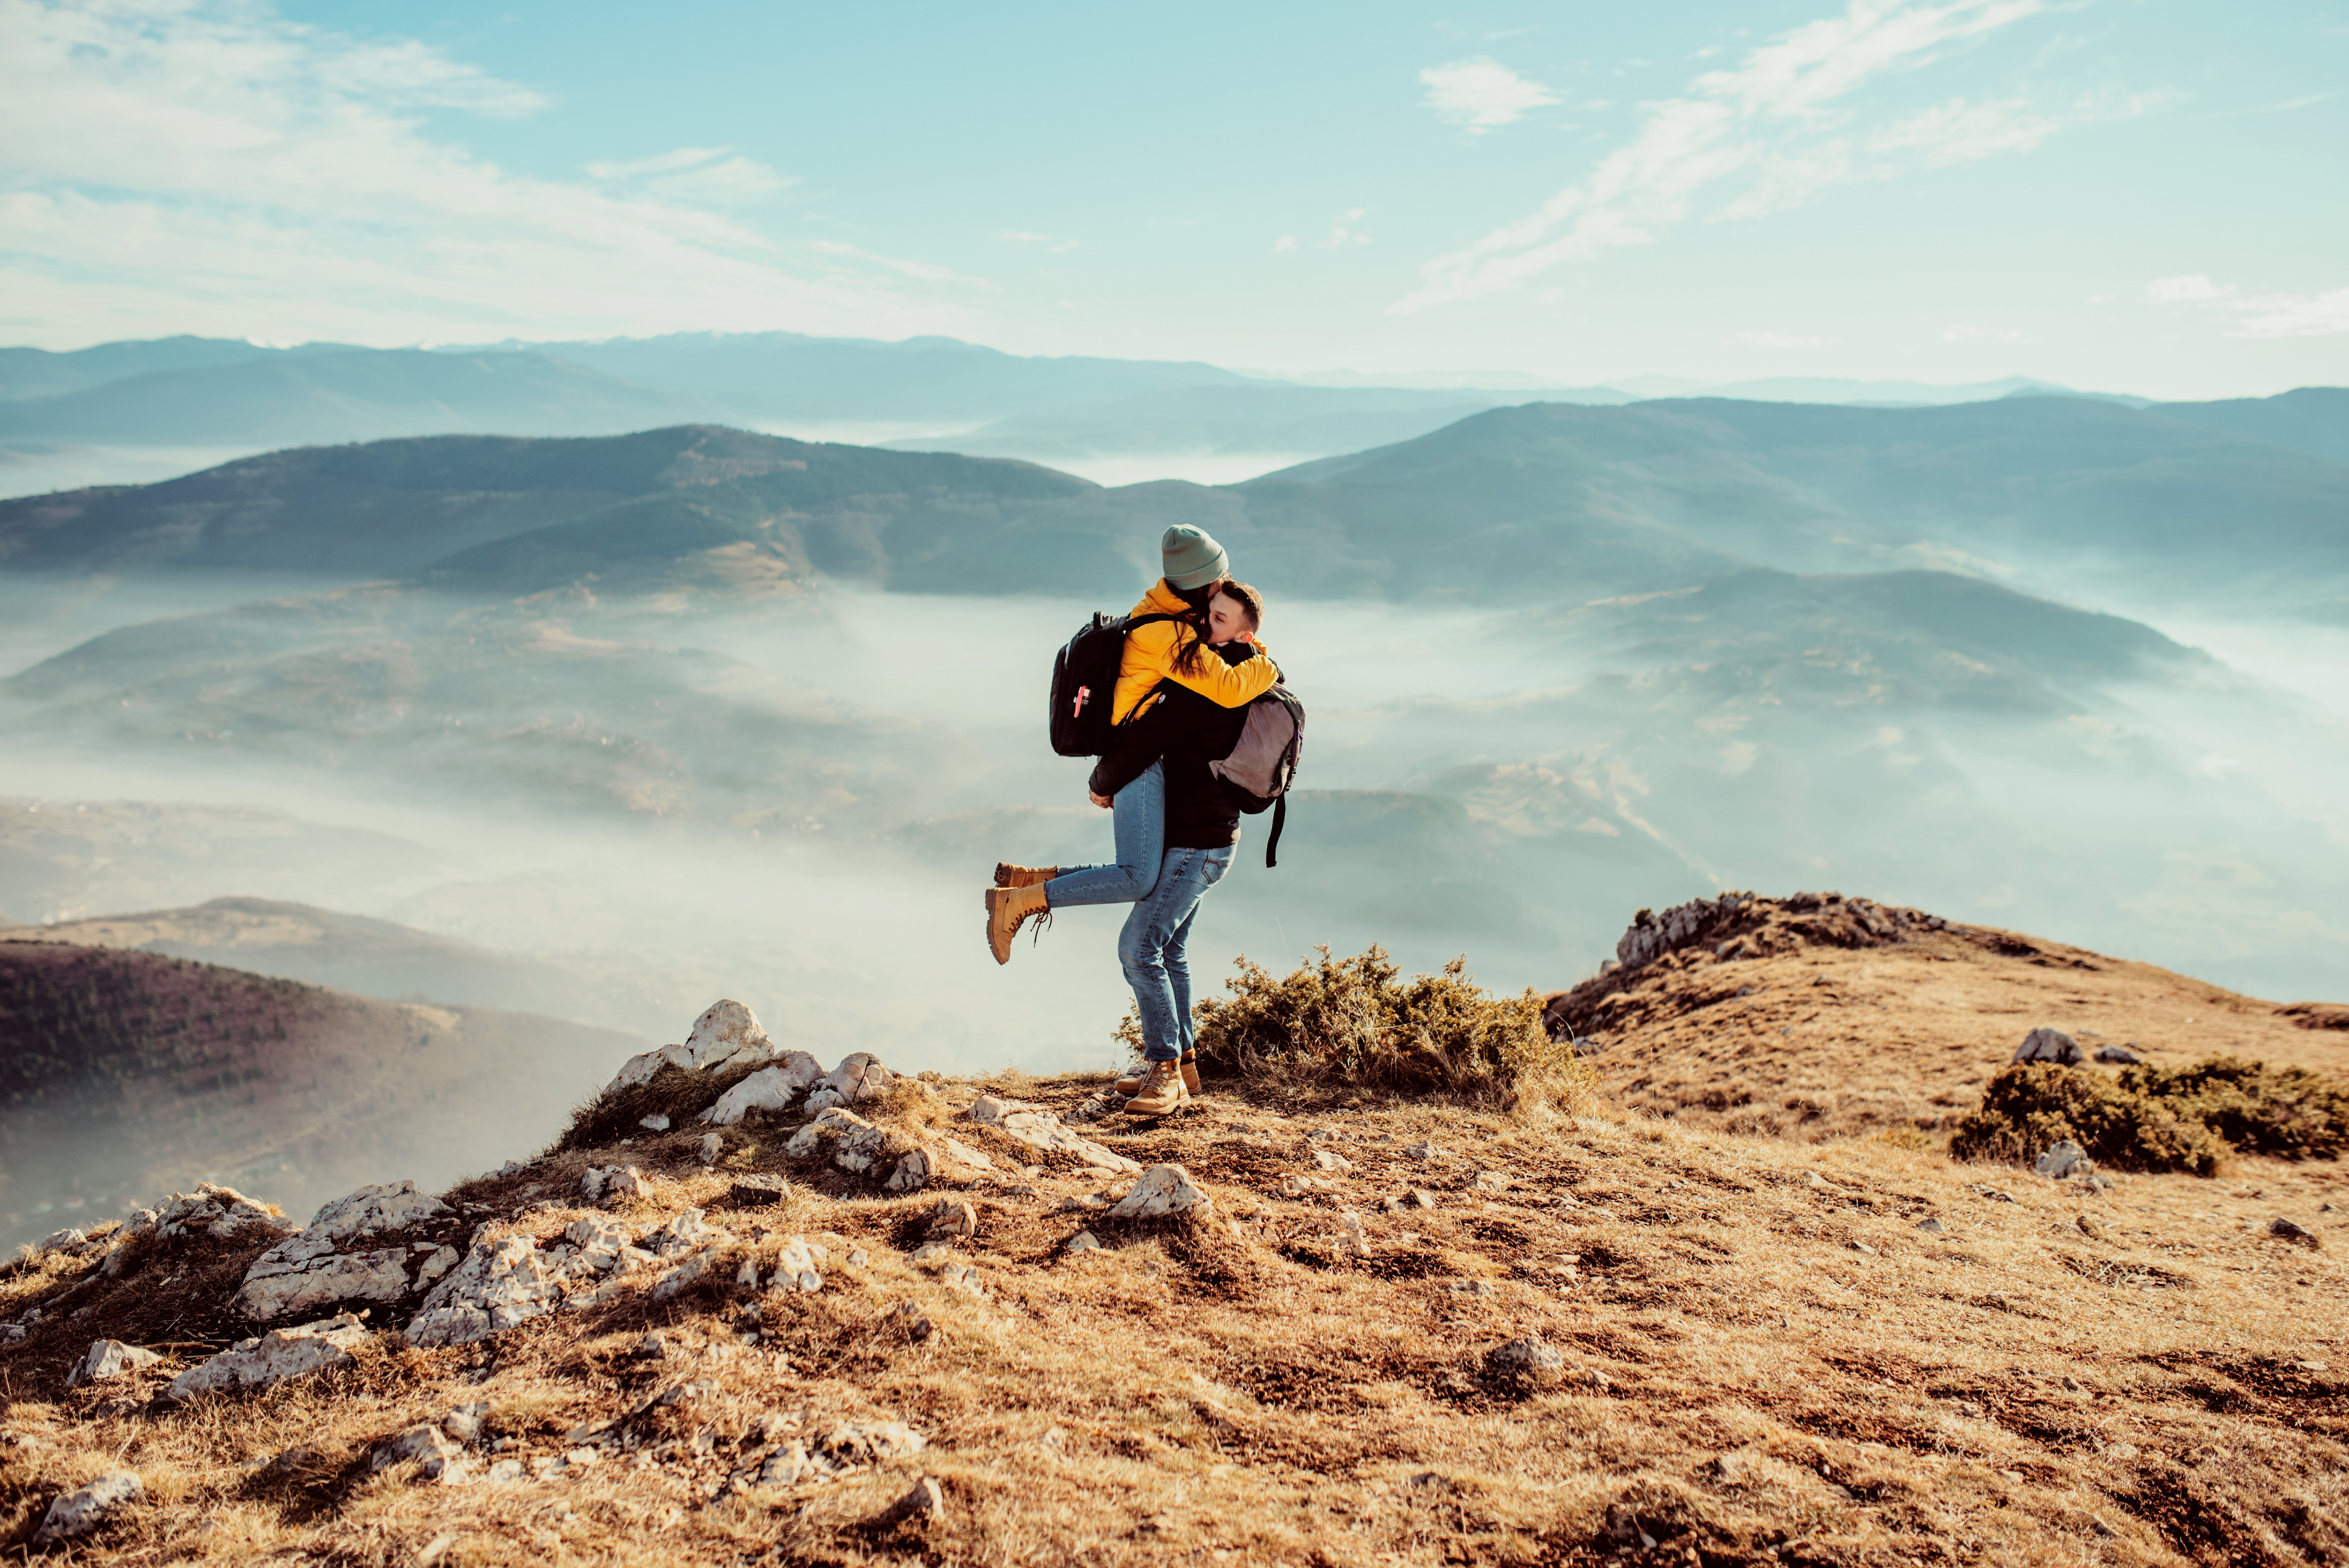 Couples are insured on the trip and hug on a mountain top with misty valleys in the background.